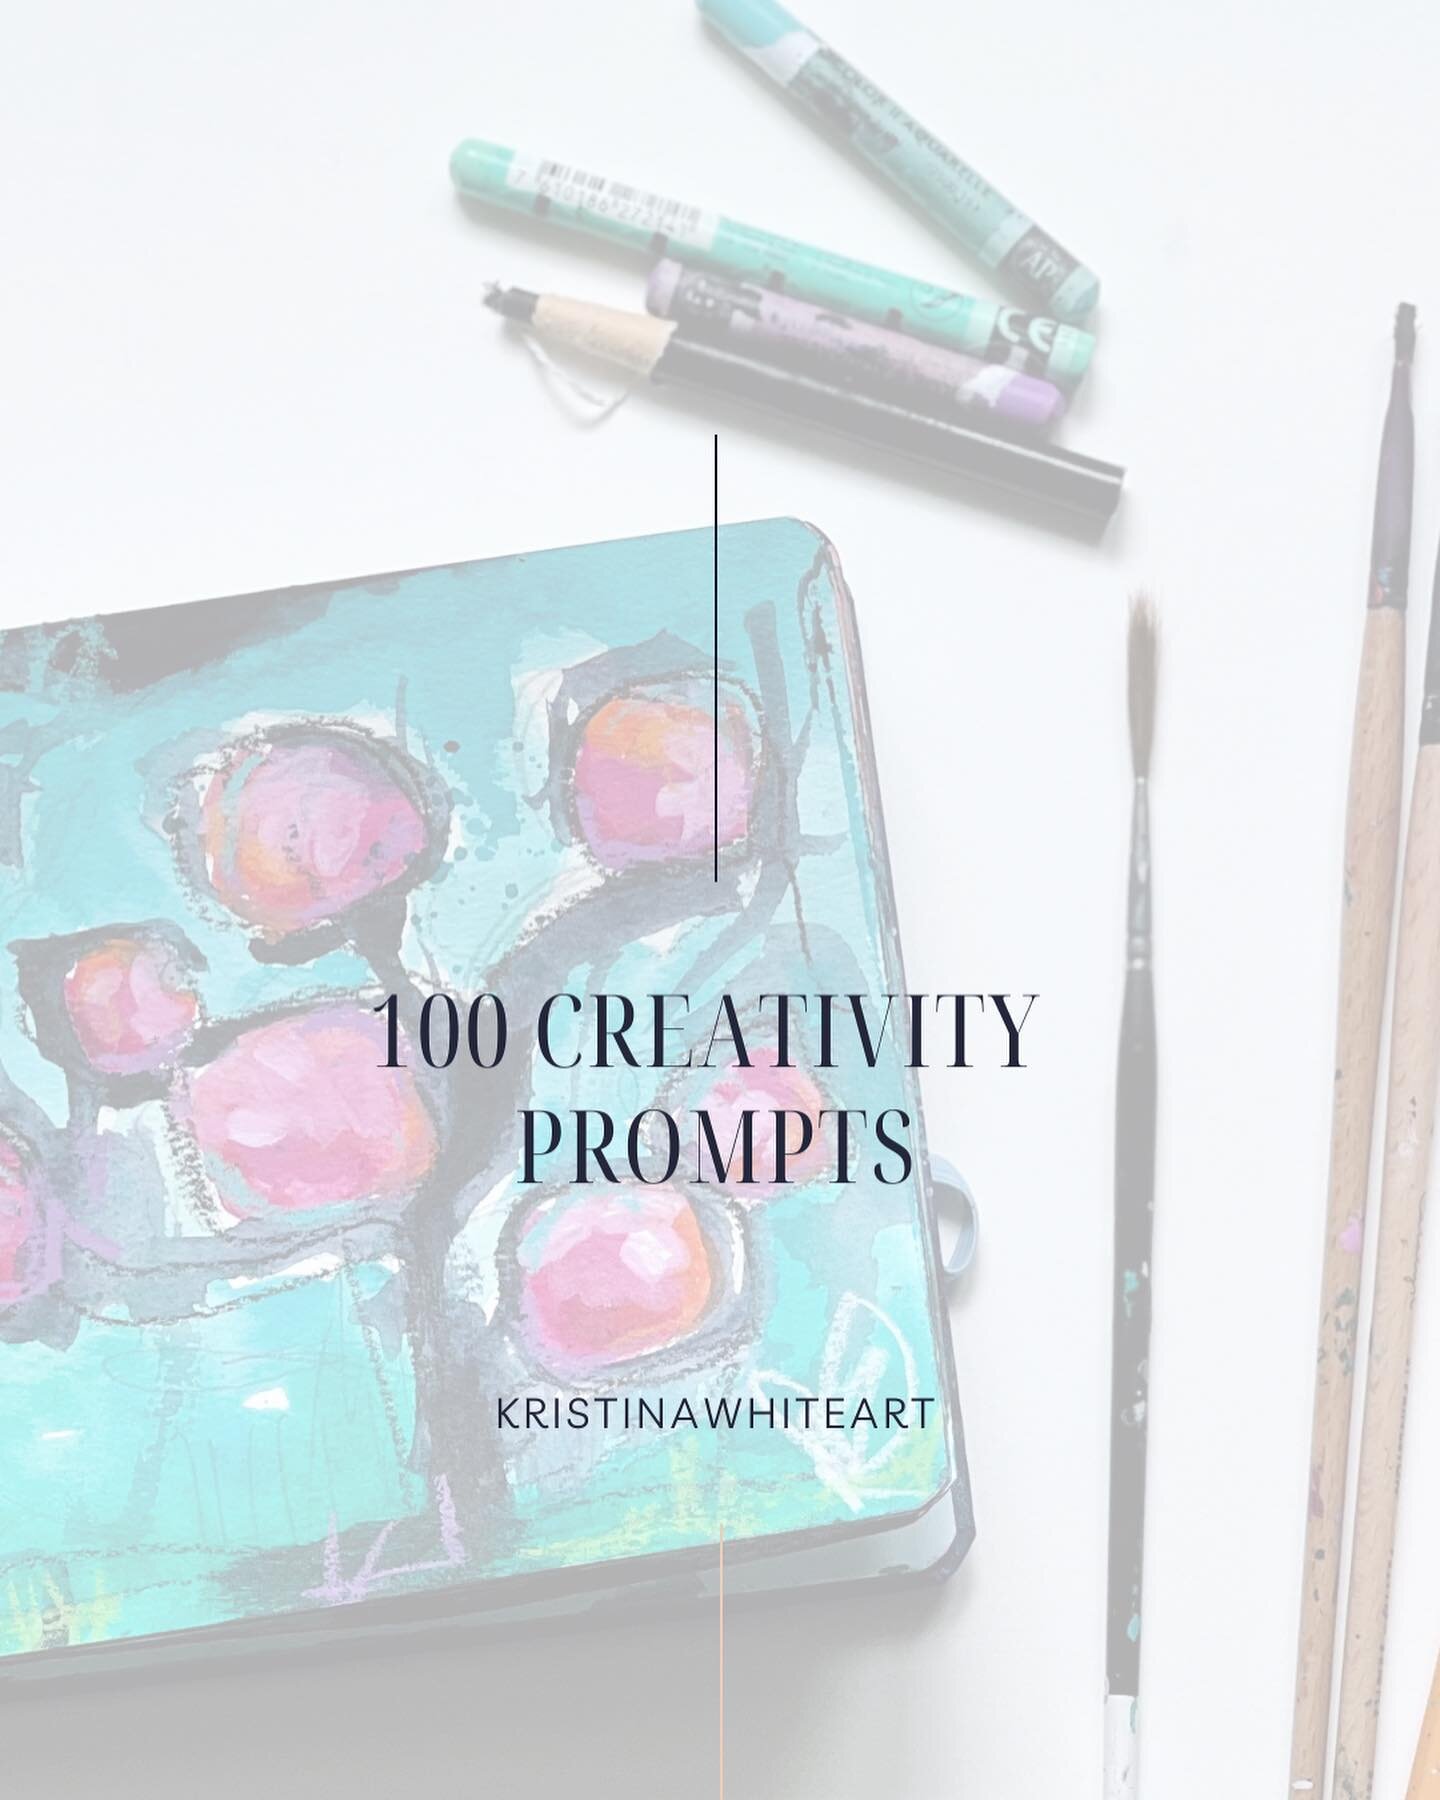 Now available!✨
100 Creativity Prompts.
A list of thought provoking prompts that you can use daily for any creative pursuit! These are the very same exercises that I have used to create a daily page in my sketchbook for all of this year. Discovering 